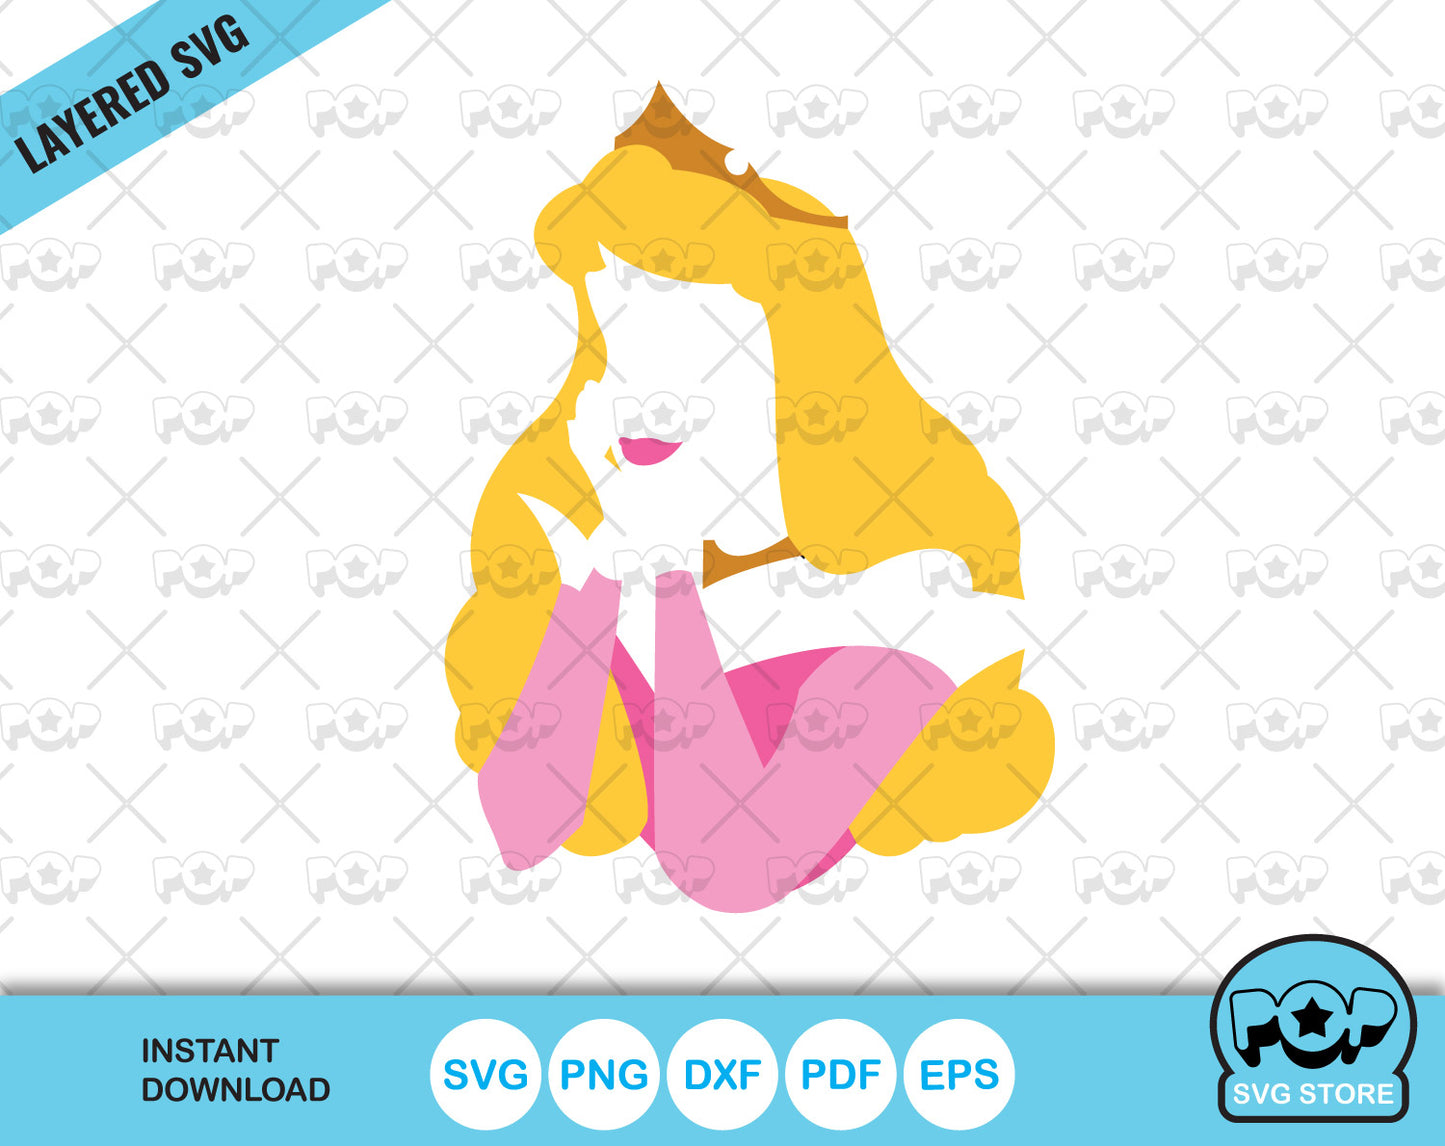 Princess Aurora clipart, Sleeping Beauty SVG cutting files for cricut silhouette, SVG, PNG, DXF, instant download